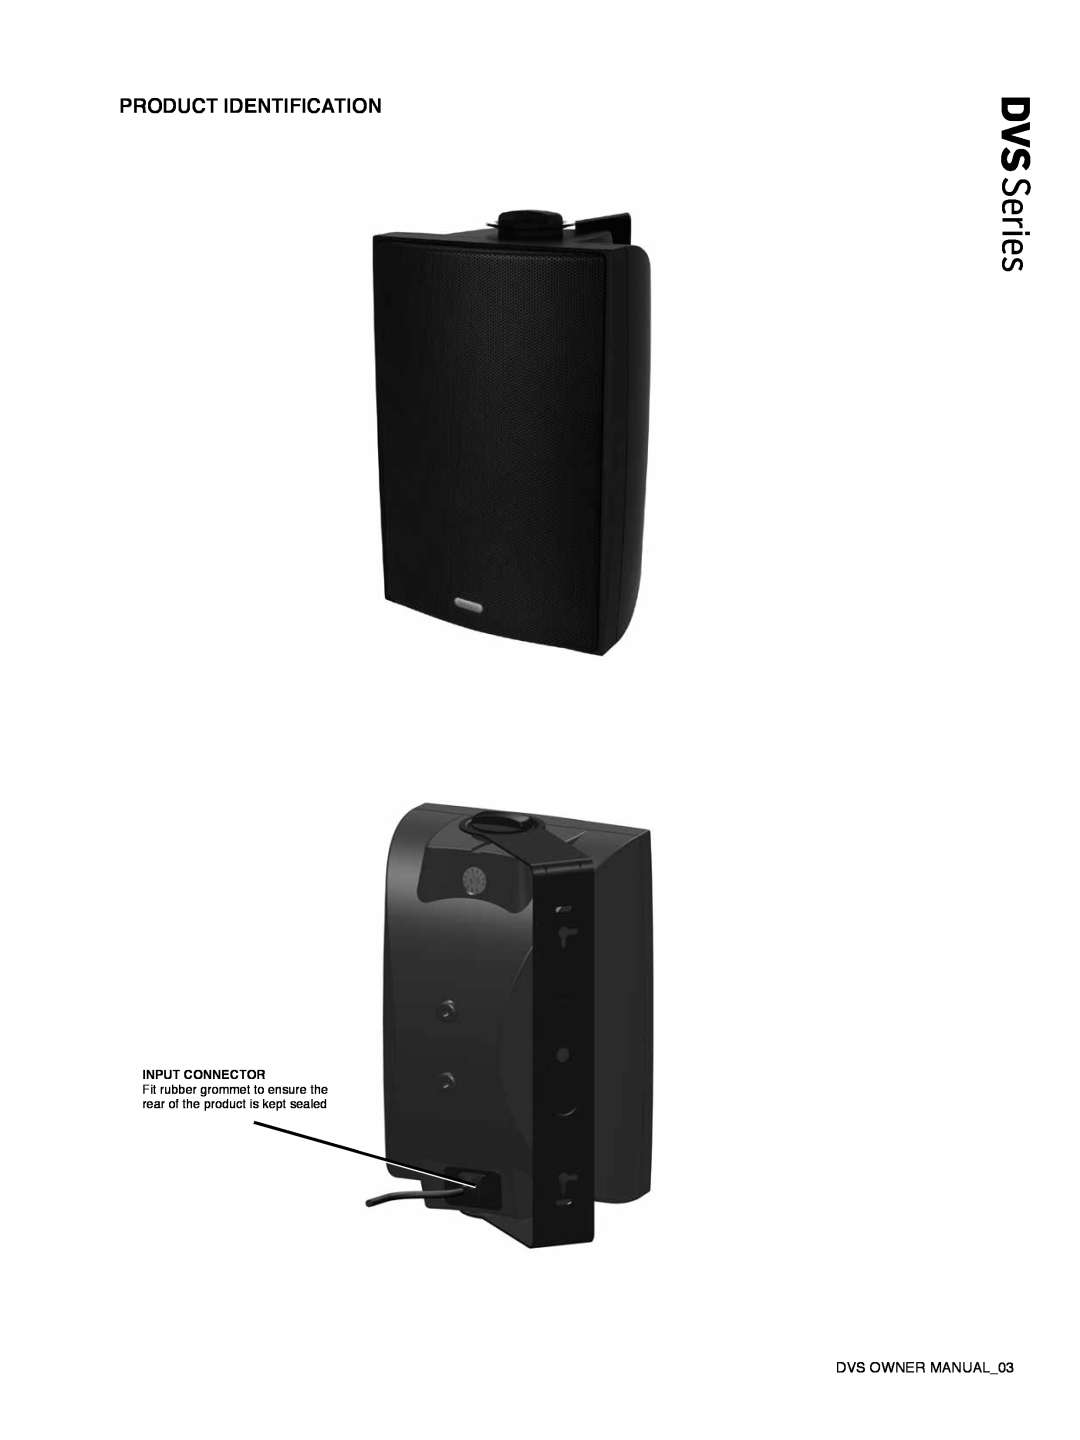 Tannoy DVS Series owner manual Product Identification, Input Connector 